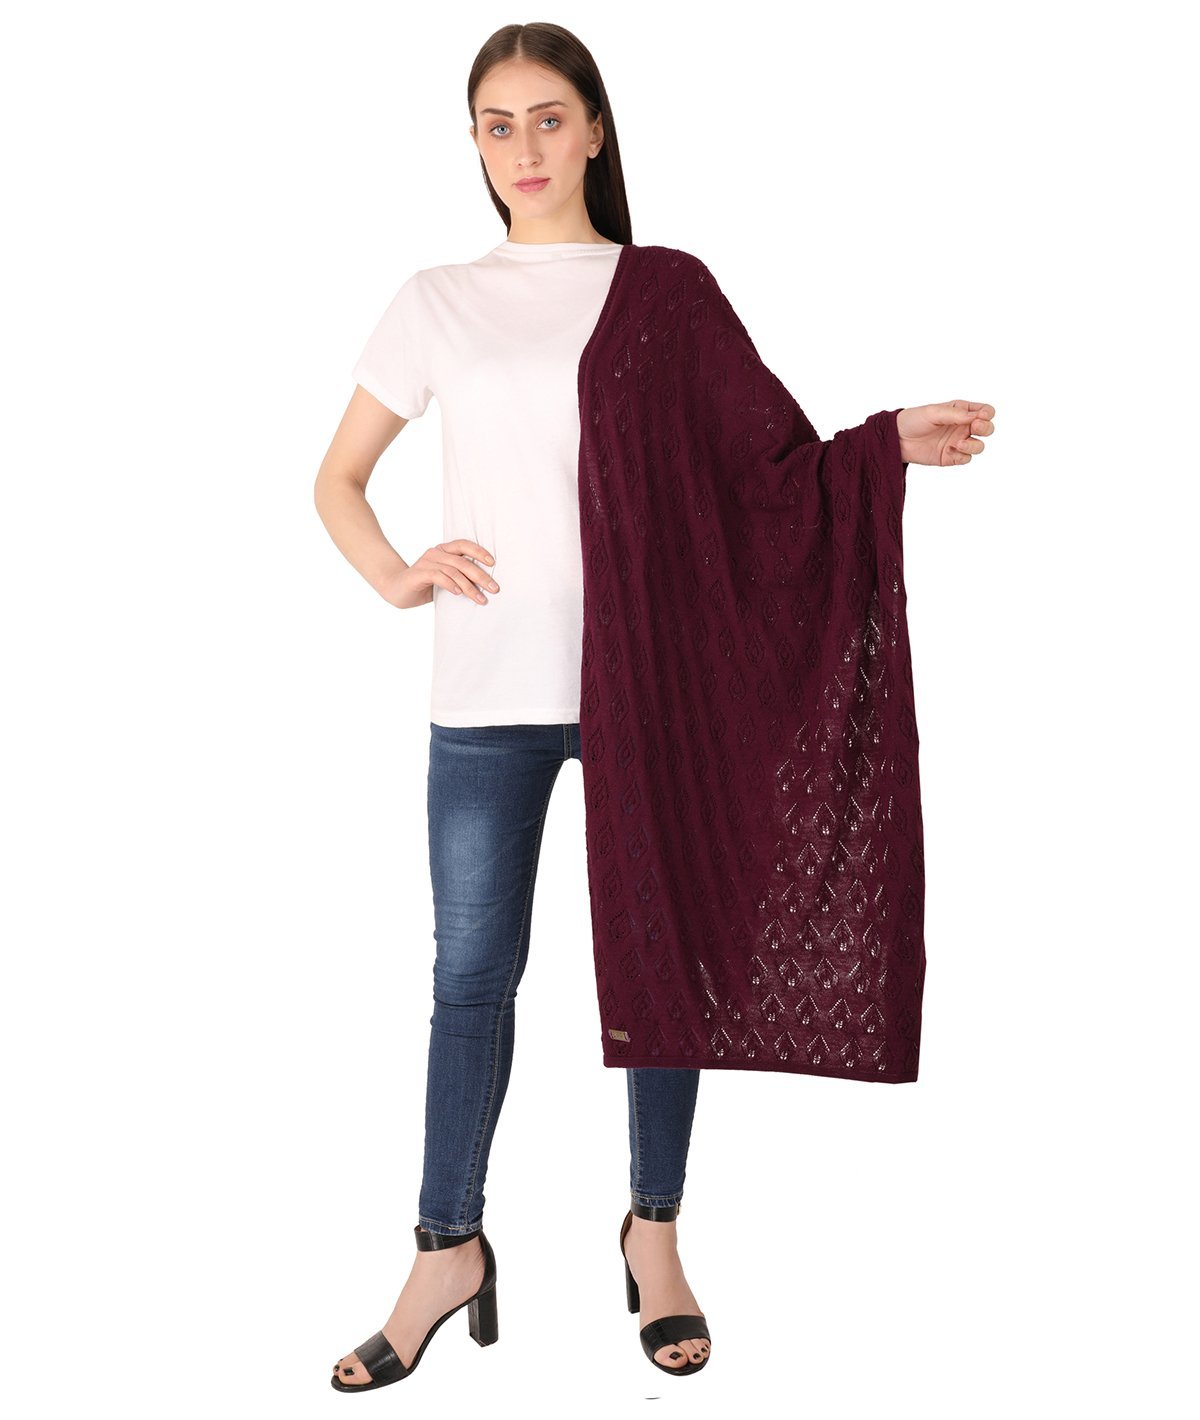 Avery - Aubergine Color Lambswool & Nylon Knitted Shawl Wrap